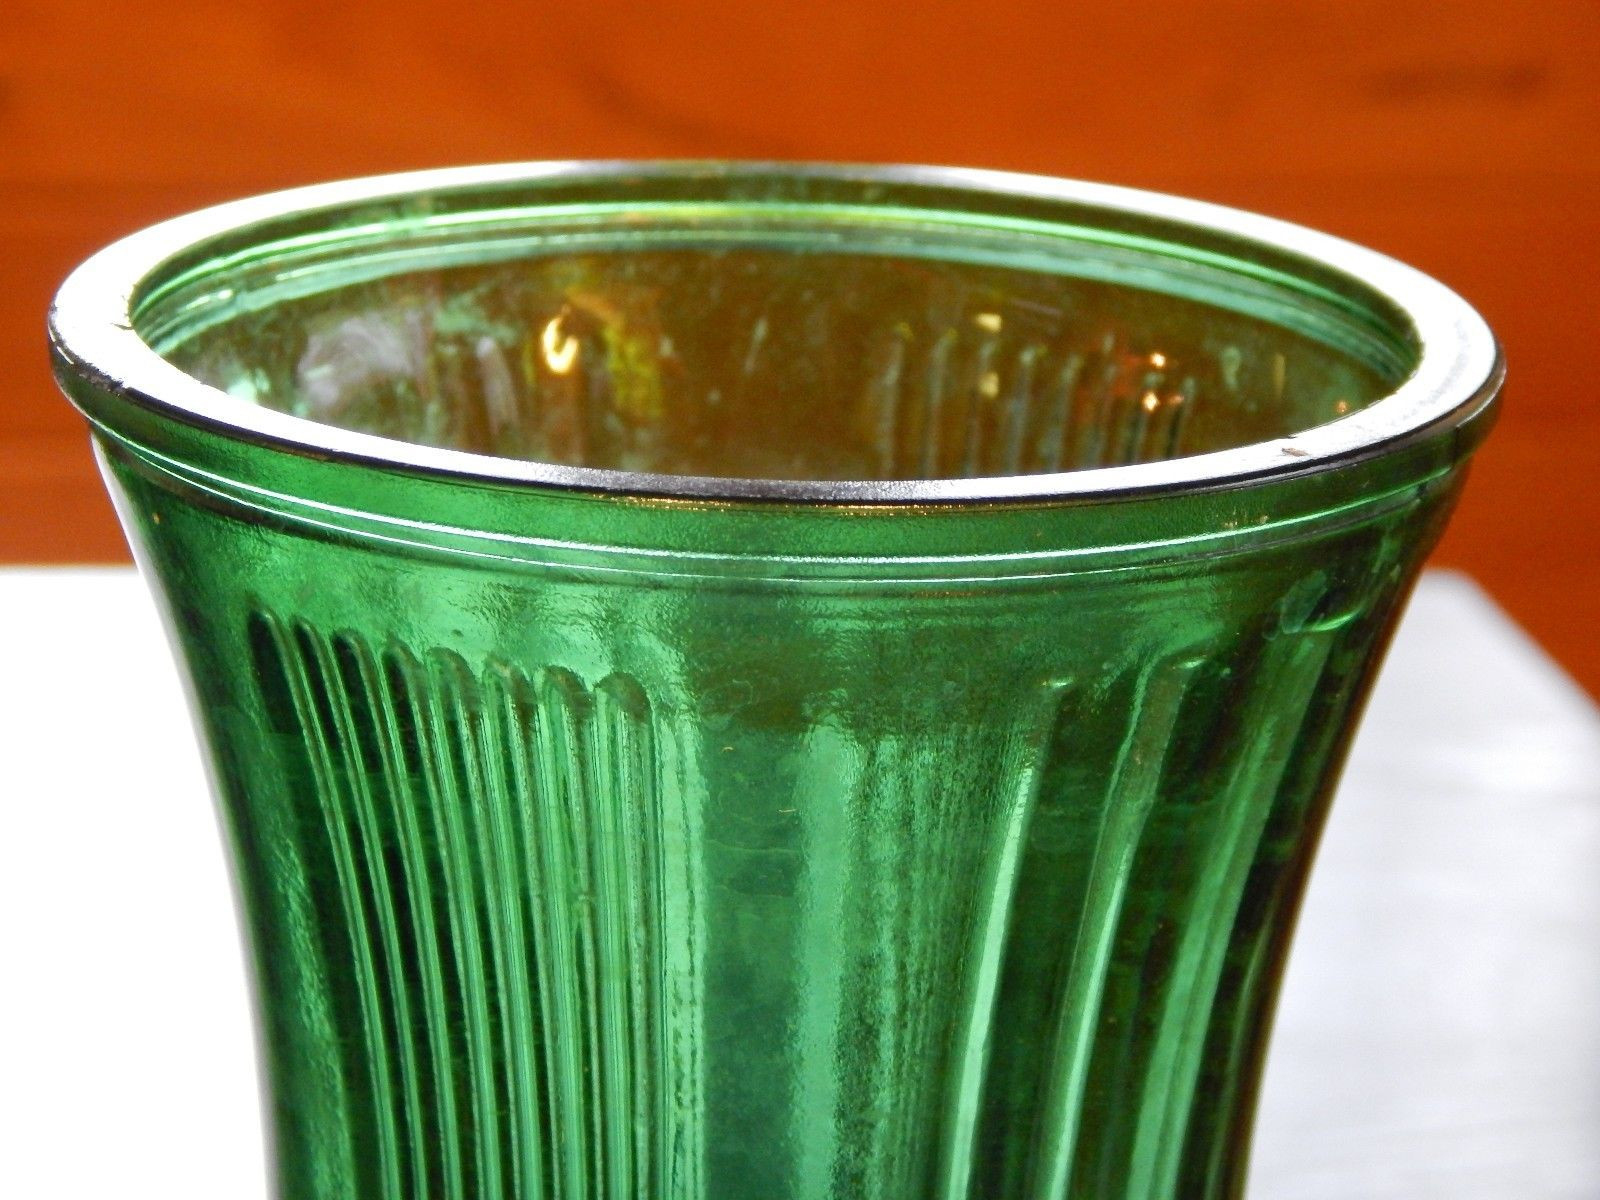 14 Unique Hoosier Glass Vase 4096 2024 free download hoosier glass vase 4096 of vintage 8 5 hoosier glass green emerald vase ribbed swirl pattern 3 with regard to vintage 8 5 hoosier glass green emerald vase ribbed swirl pattern 3 available 2 